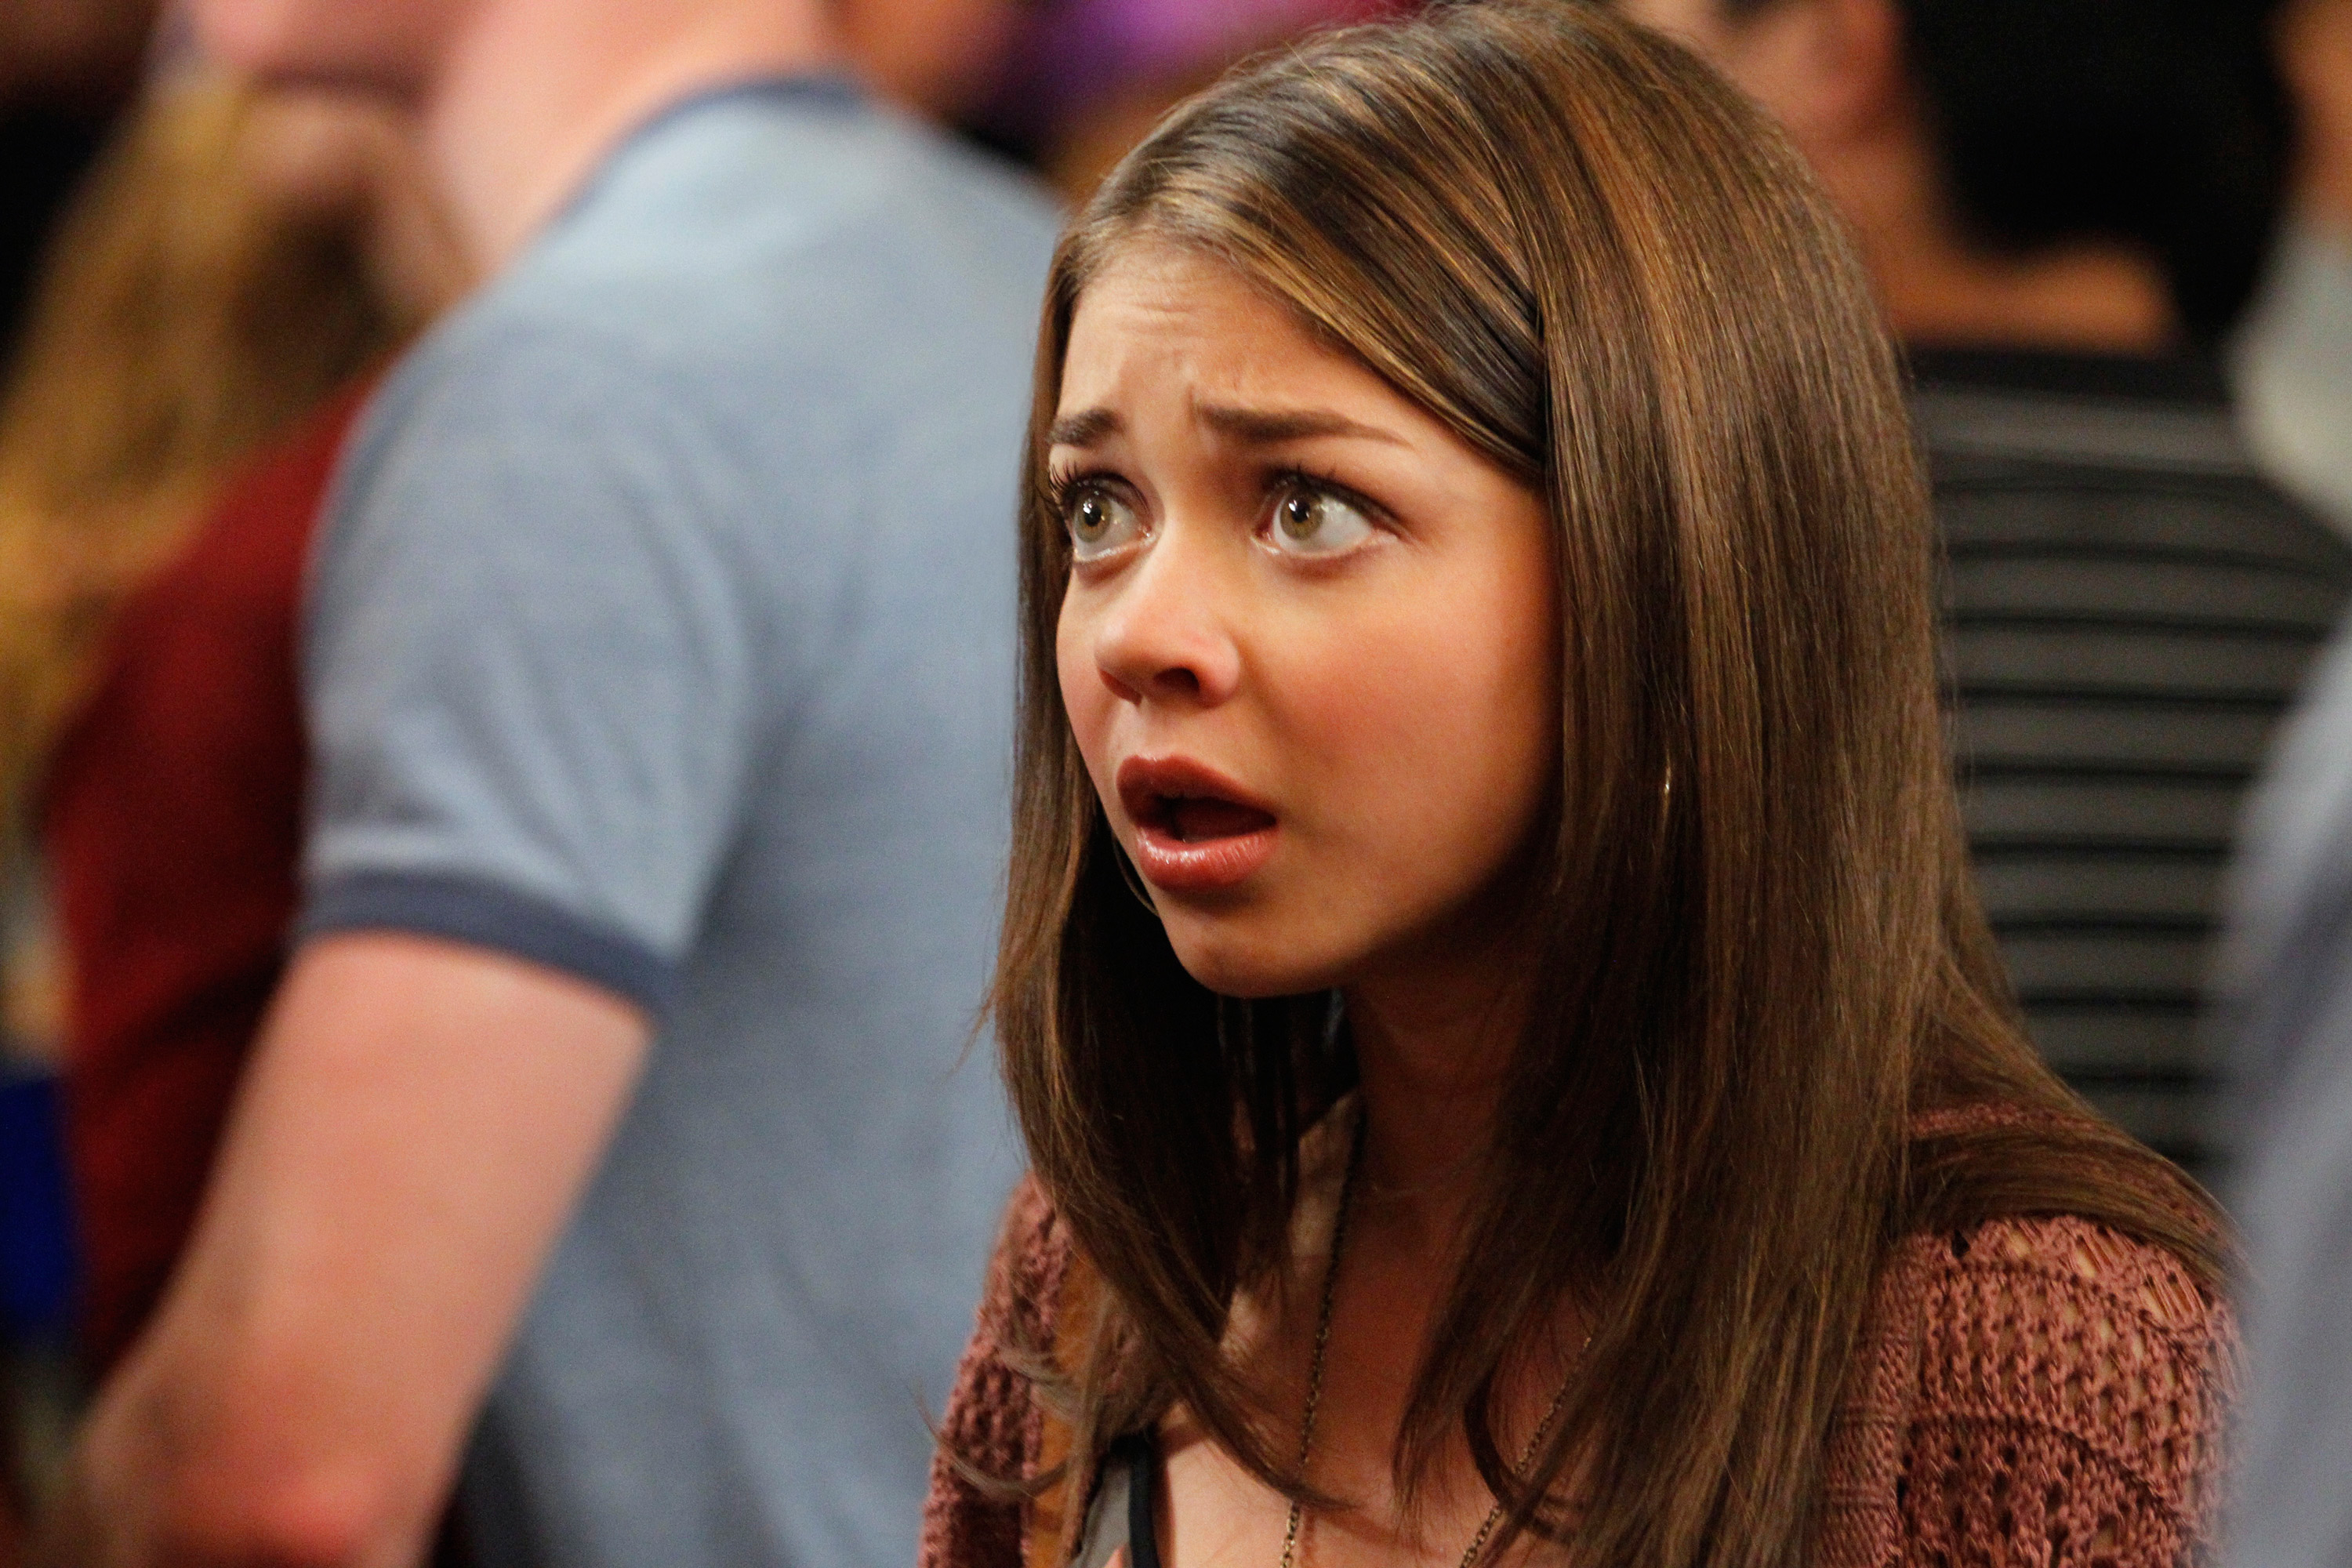 Sarah Hyland is shown with an anxious expression, wearing a casual outfit amidst a crowd